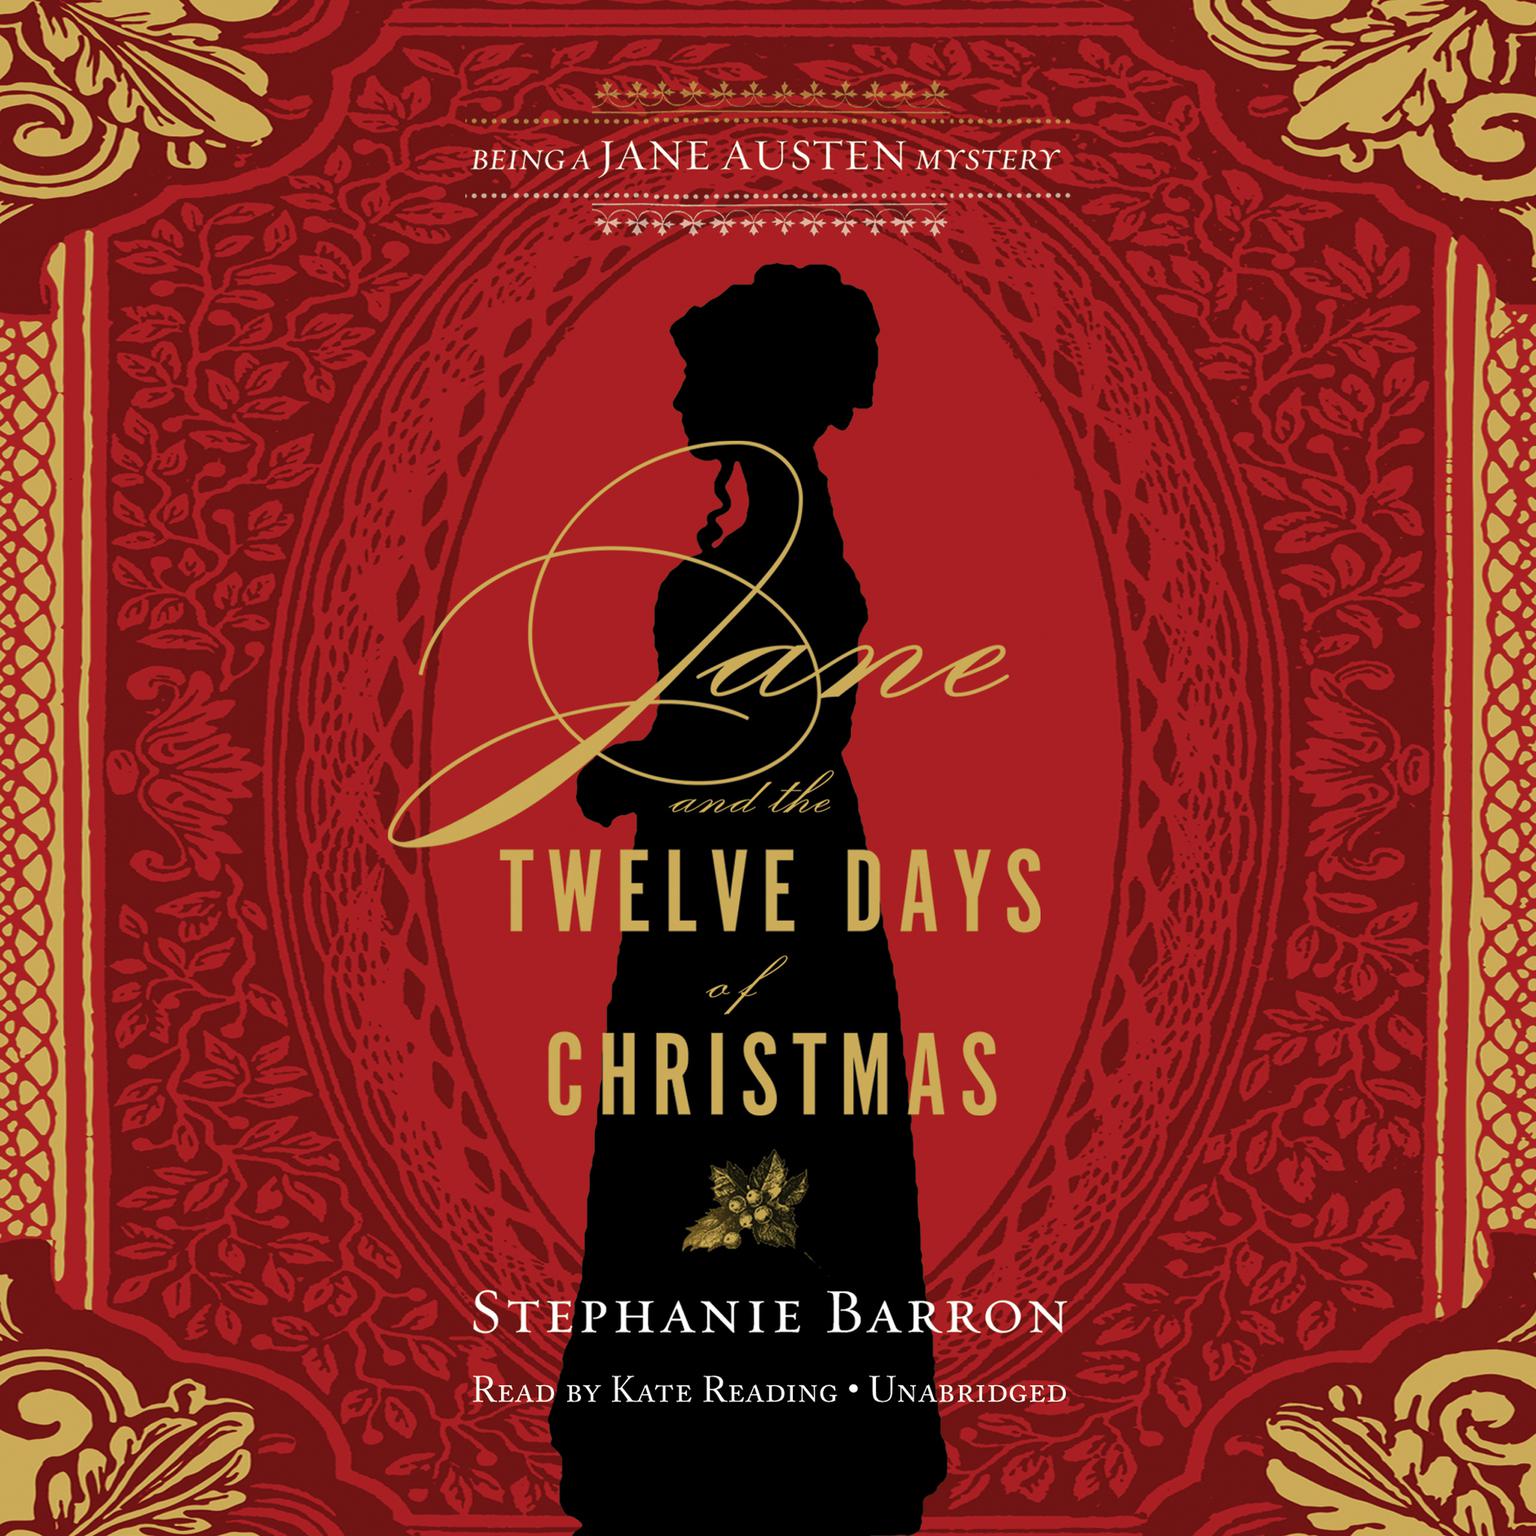 Jane and the Twelve Days of Christmas: Being a Jane Austen Mystery Audiobook, by Stephanie Barron